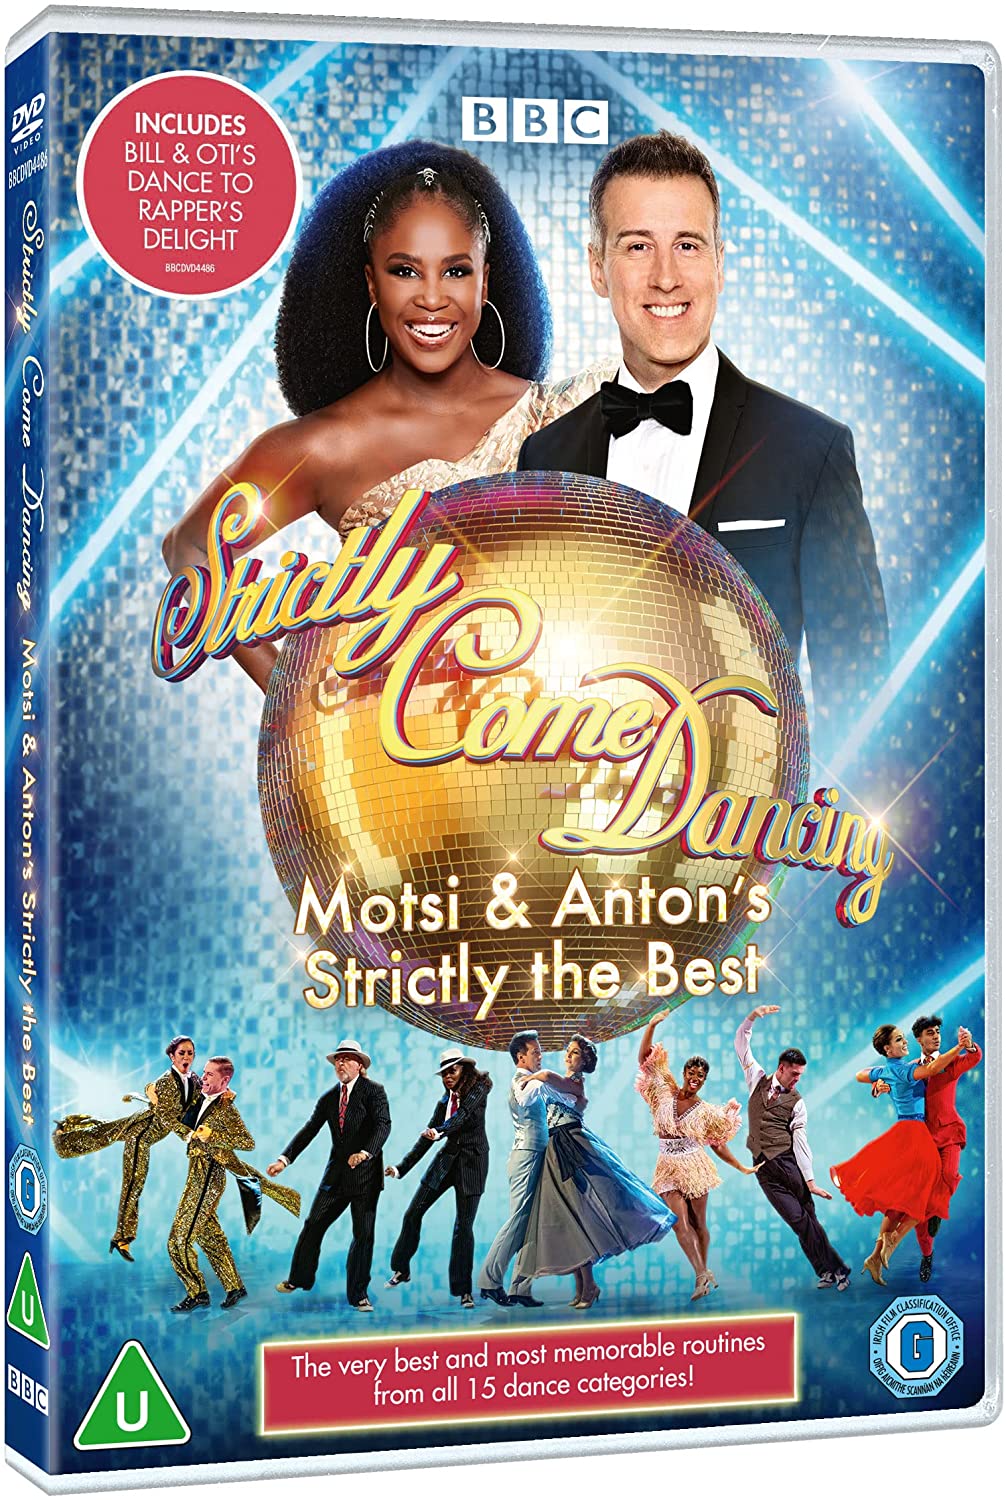 Strictly Come Dancing - Motsi & Anton's Strictly The Best  [2021] [DVD]